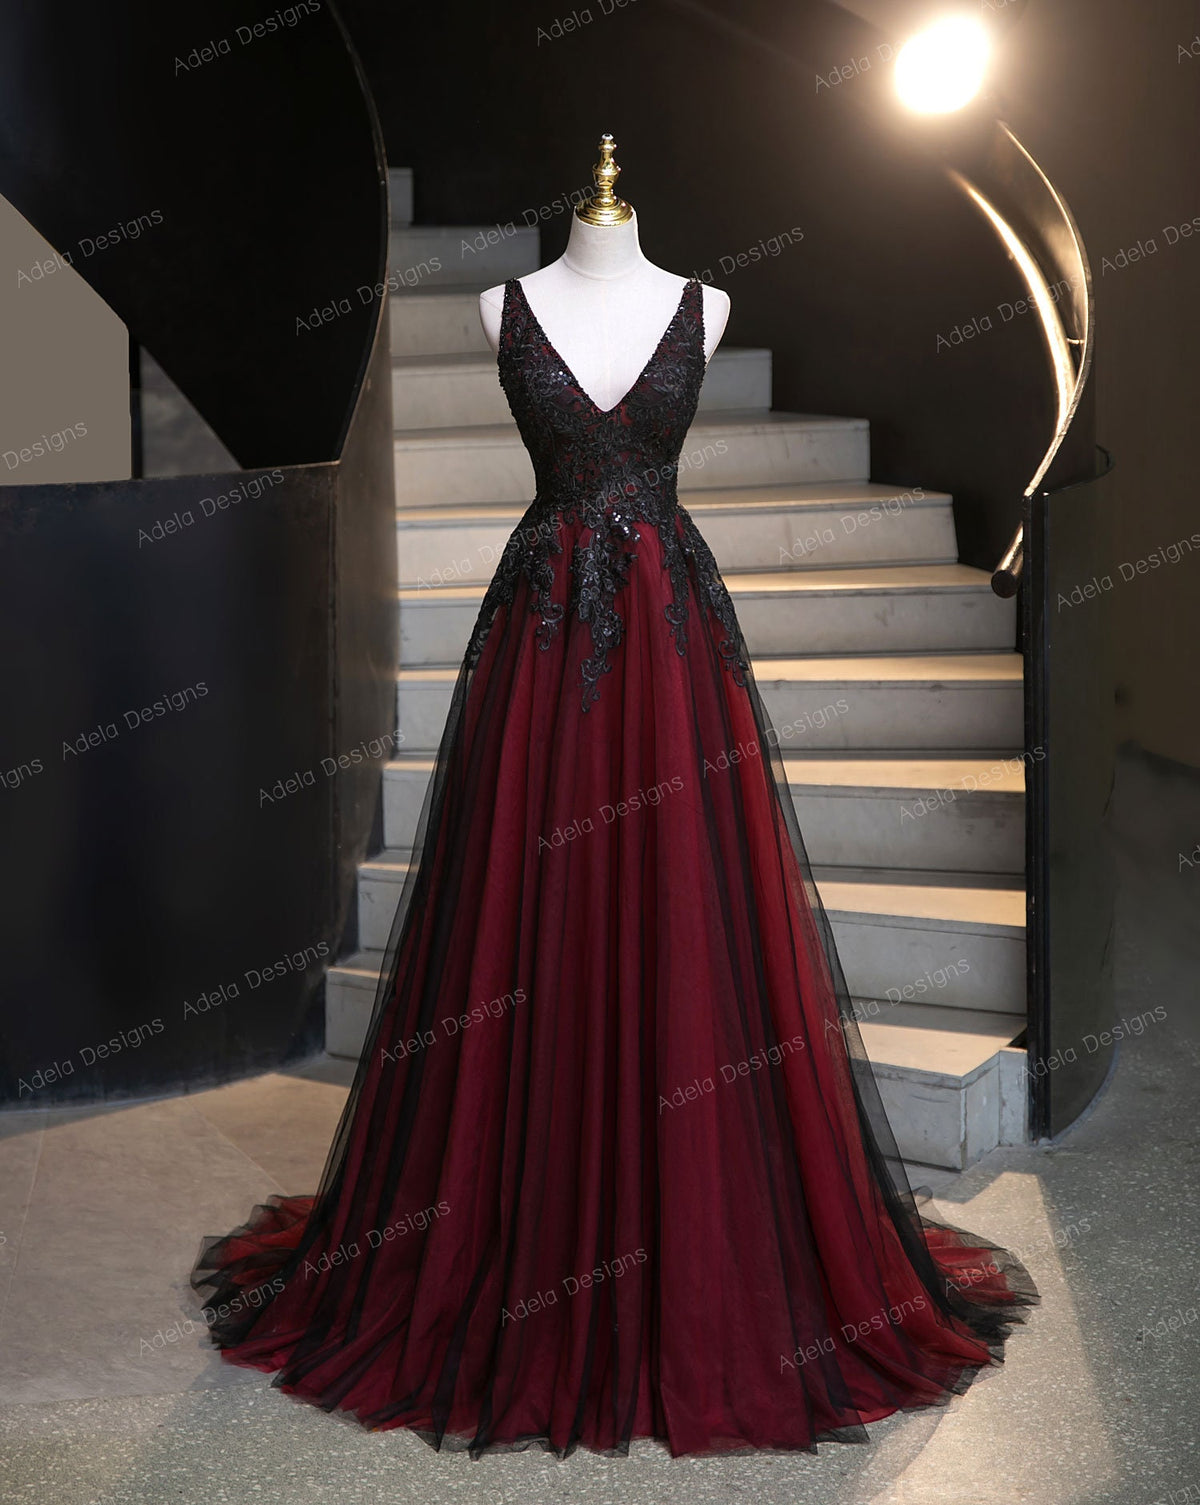 Gothic Red and Black Sequined Lace ALine Sleeveless Tulle Wedding Dress Bridal Gown Sleeveless Open Back Short Train Plus Size V Neck